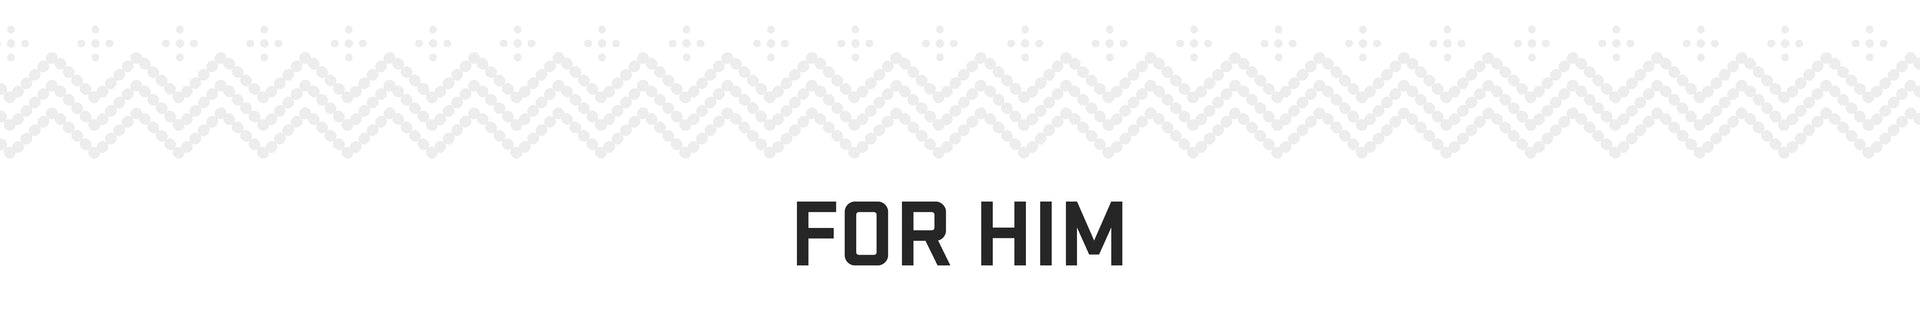 2023 Gift Guide - For Him  Header Image Text Overlay